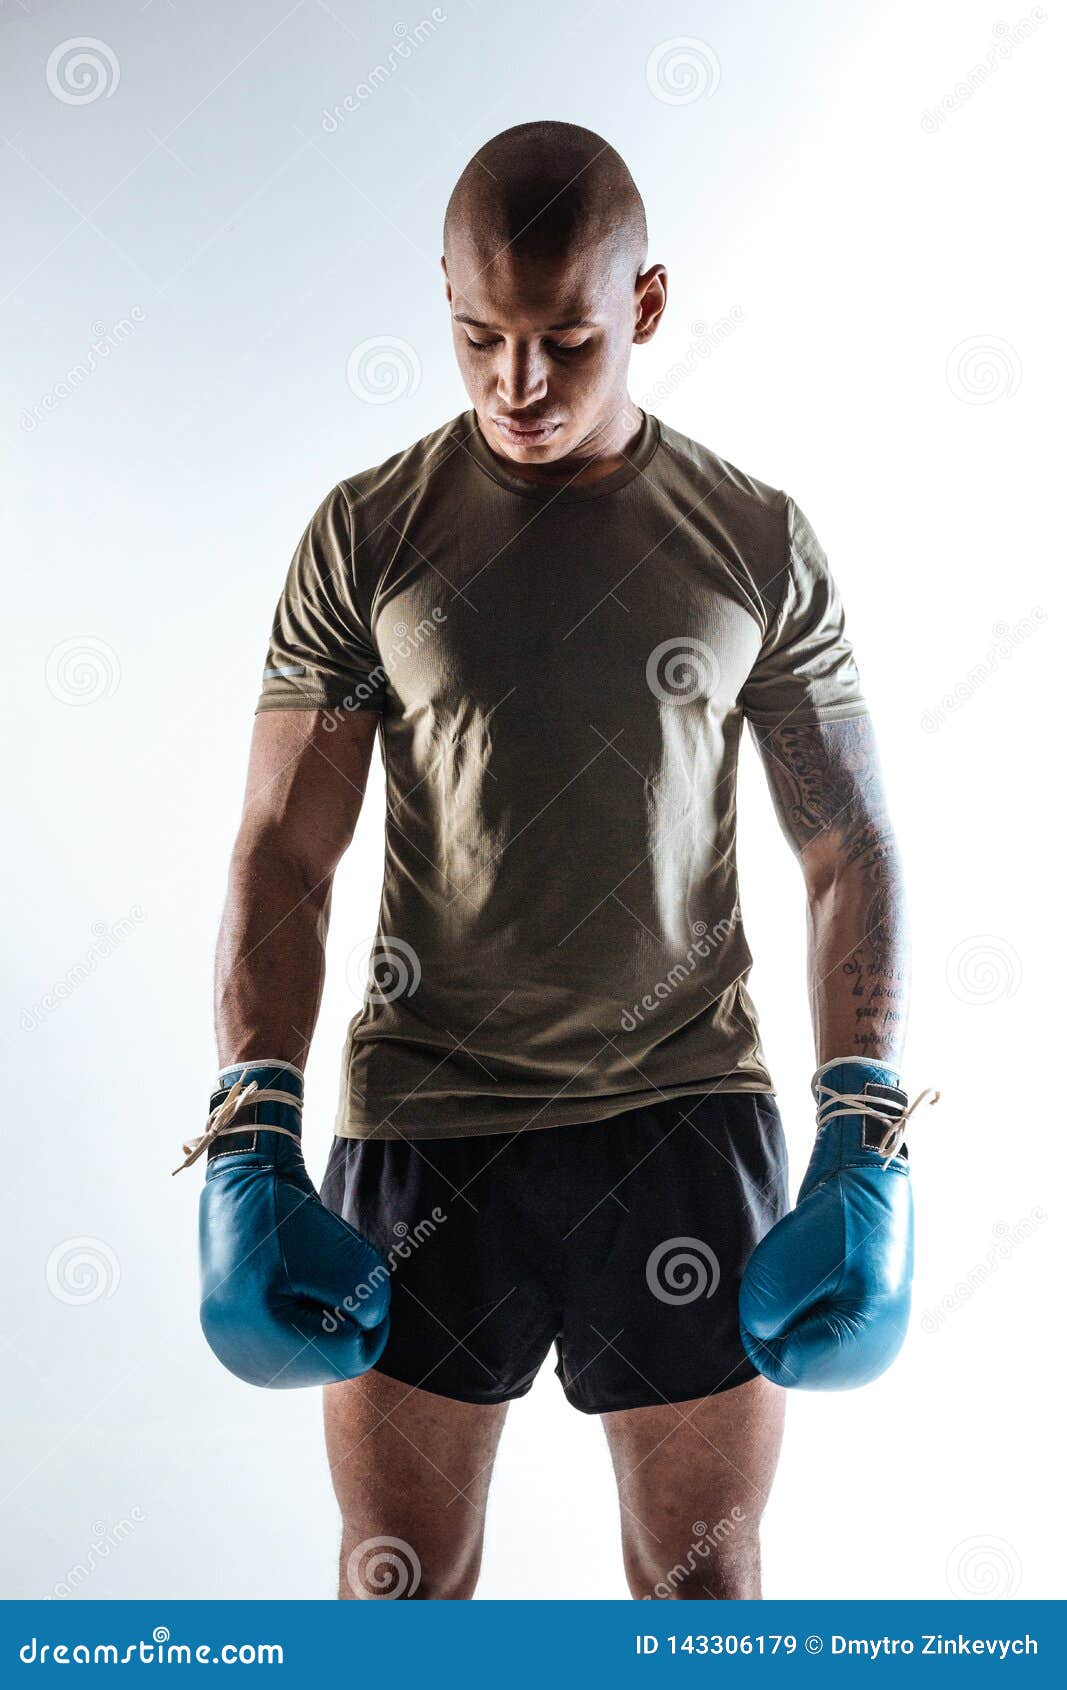 brawny sportive boxer wearing sport suit and boxing gloves